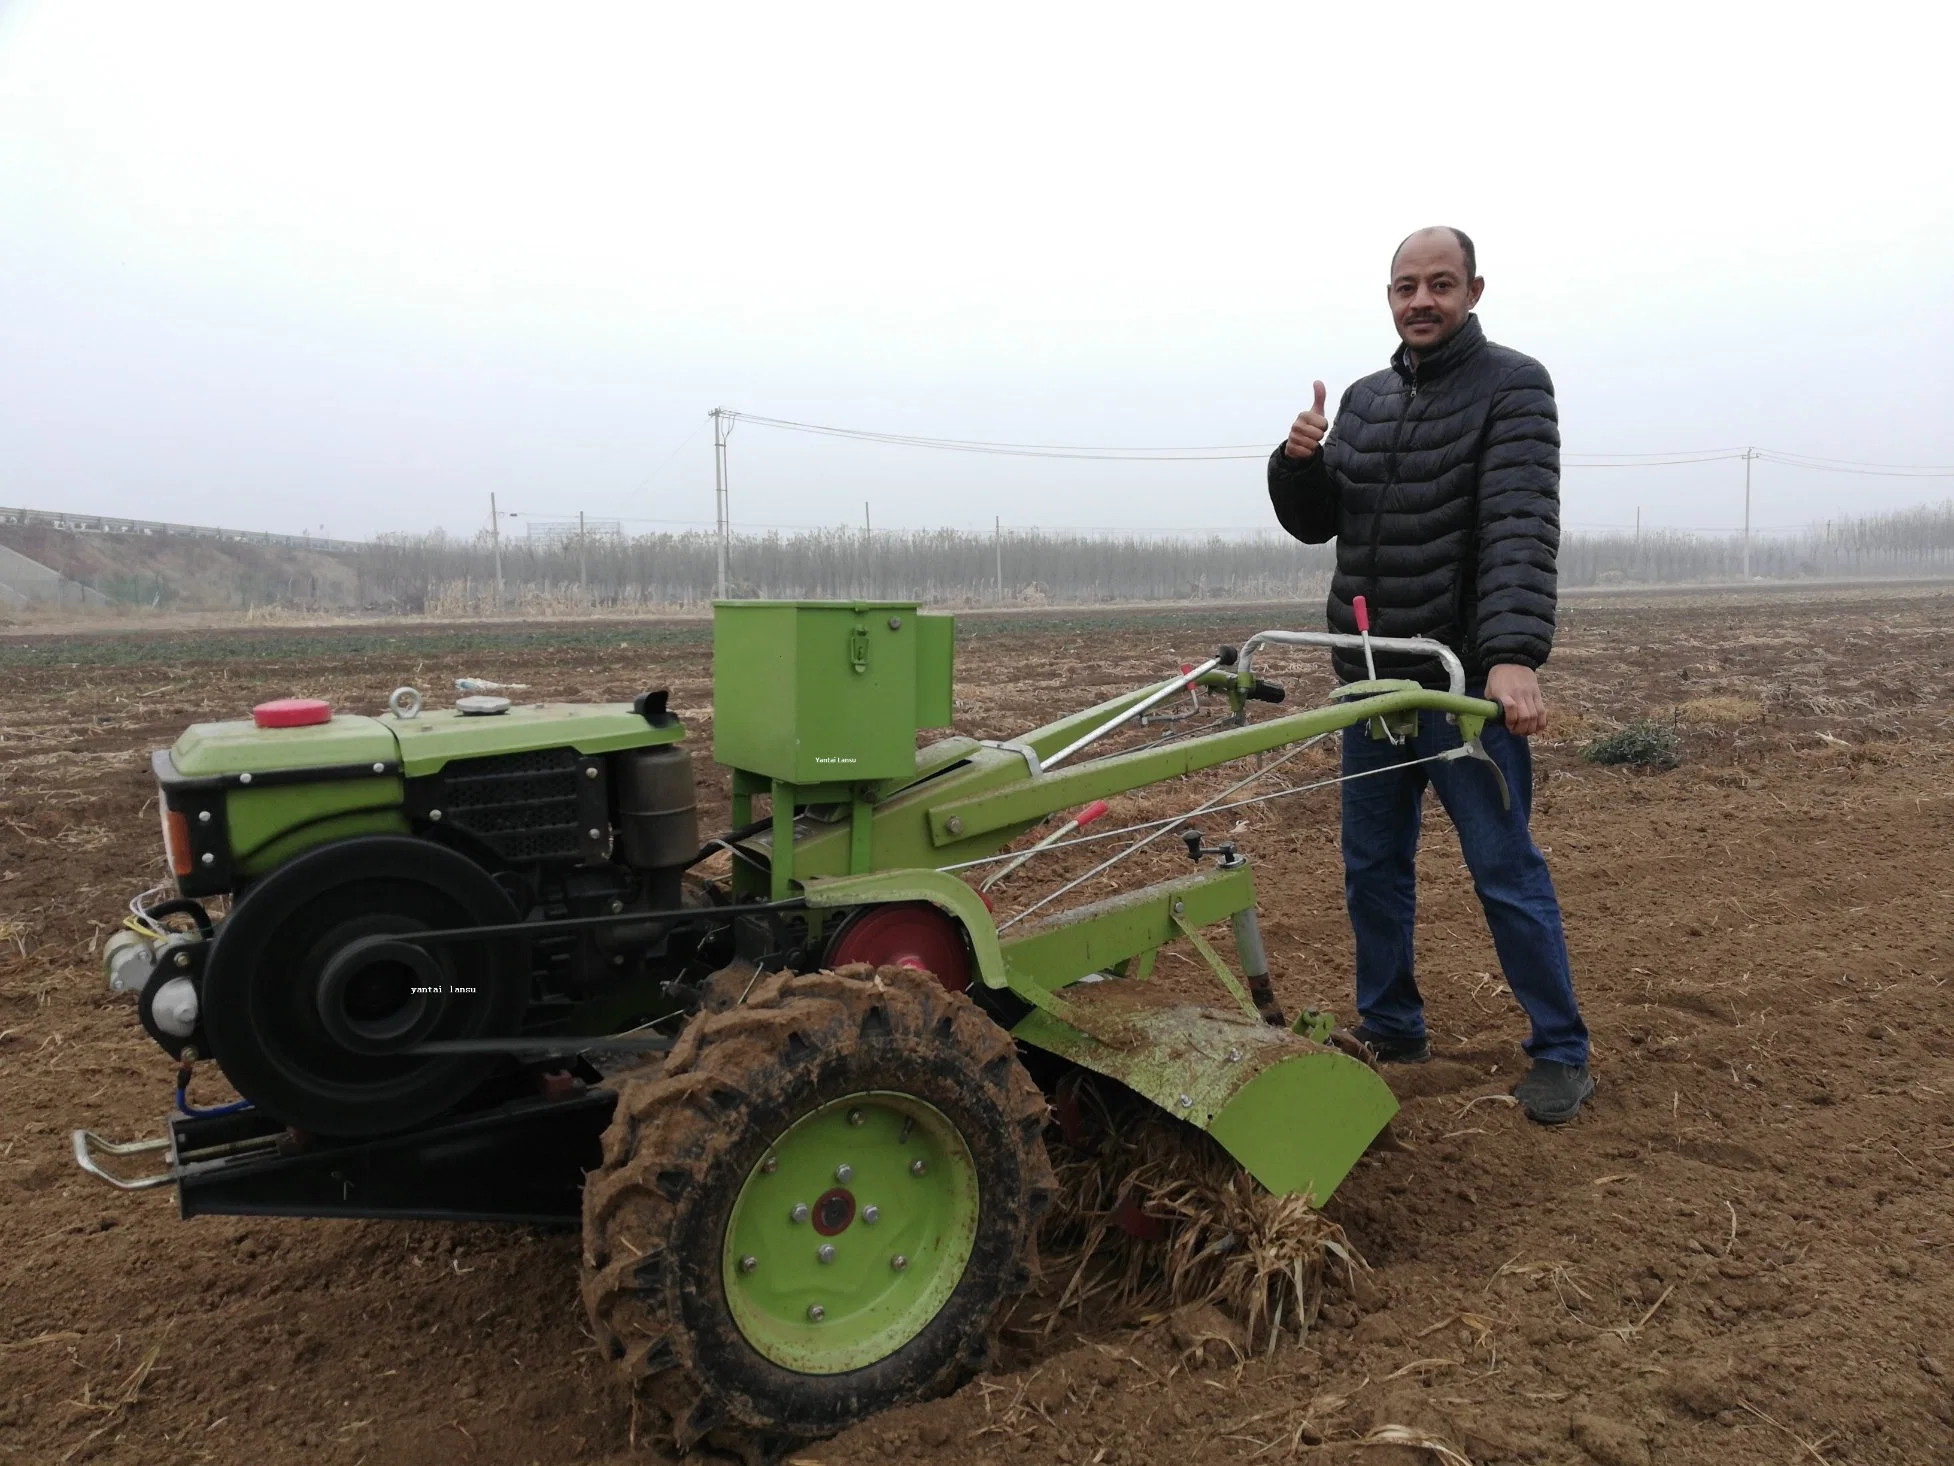 Mini Rotary Tiller Cultivator /Tractor/ Cultivator Power Tillers